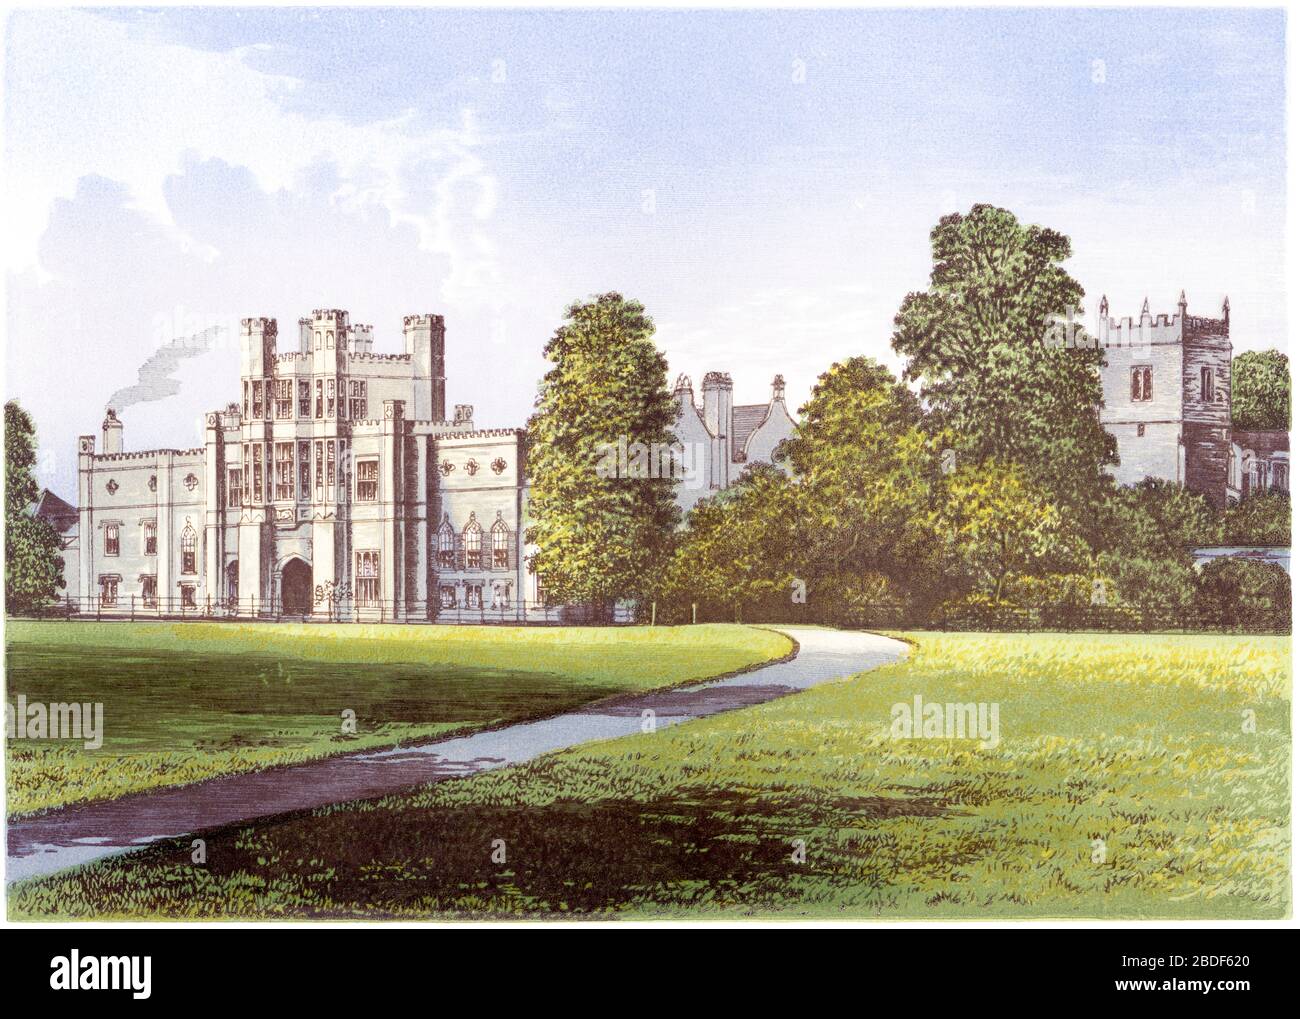 A coloured illustration of Coughton Court, Alcester, Warwickshire scanned at high resolution from a book printed in 1870.  Believed copyright free. Stock Photo